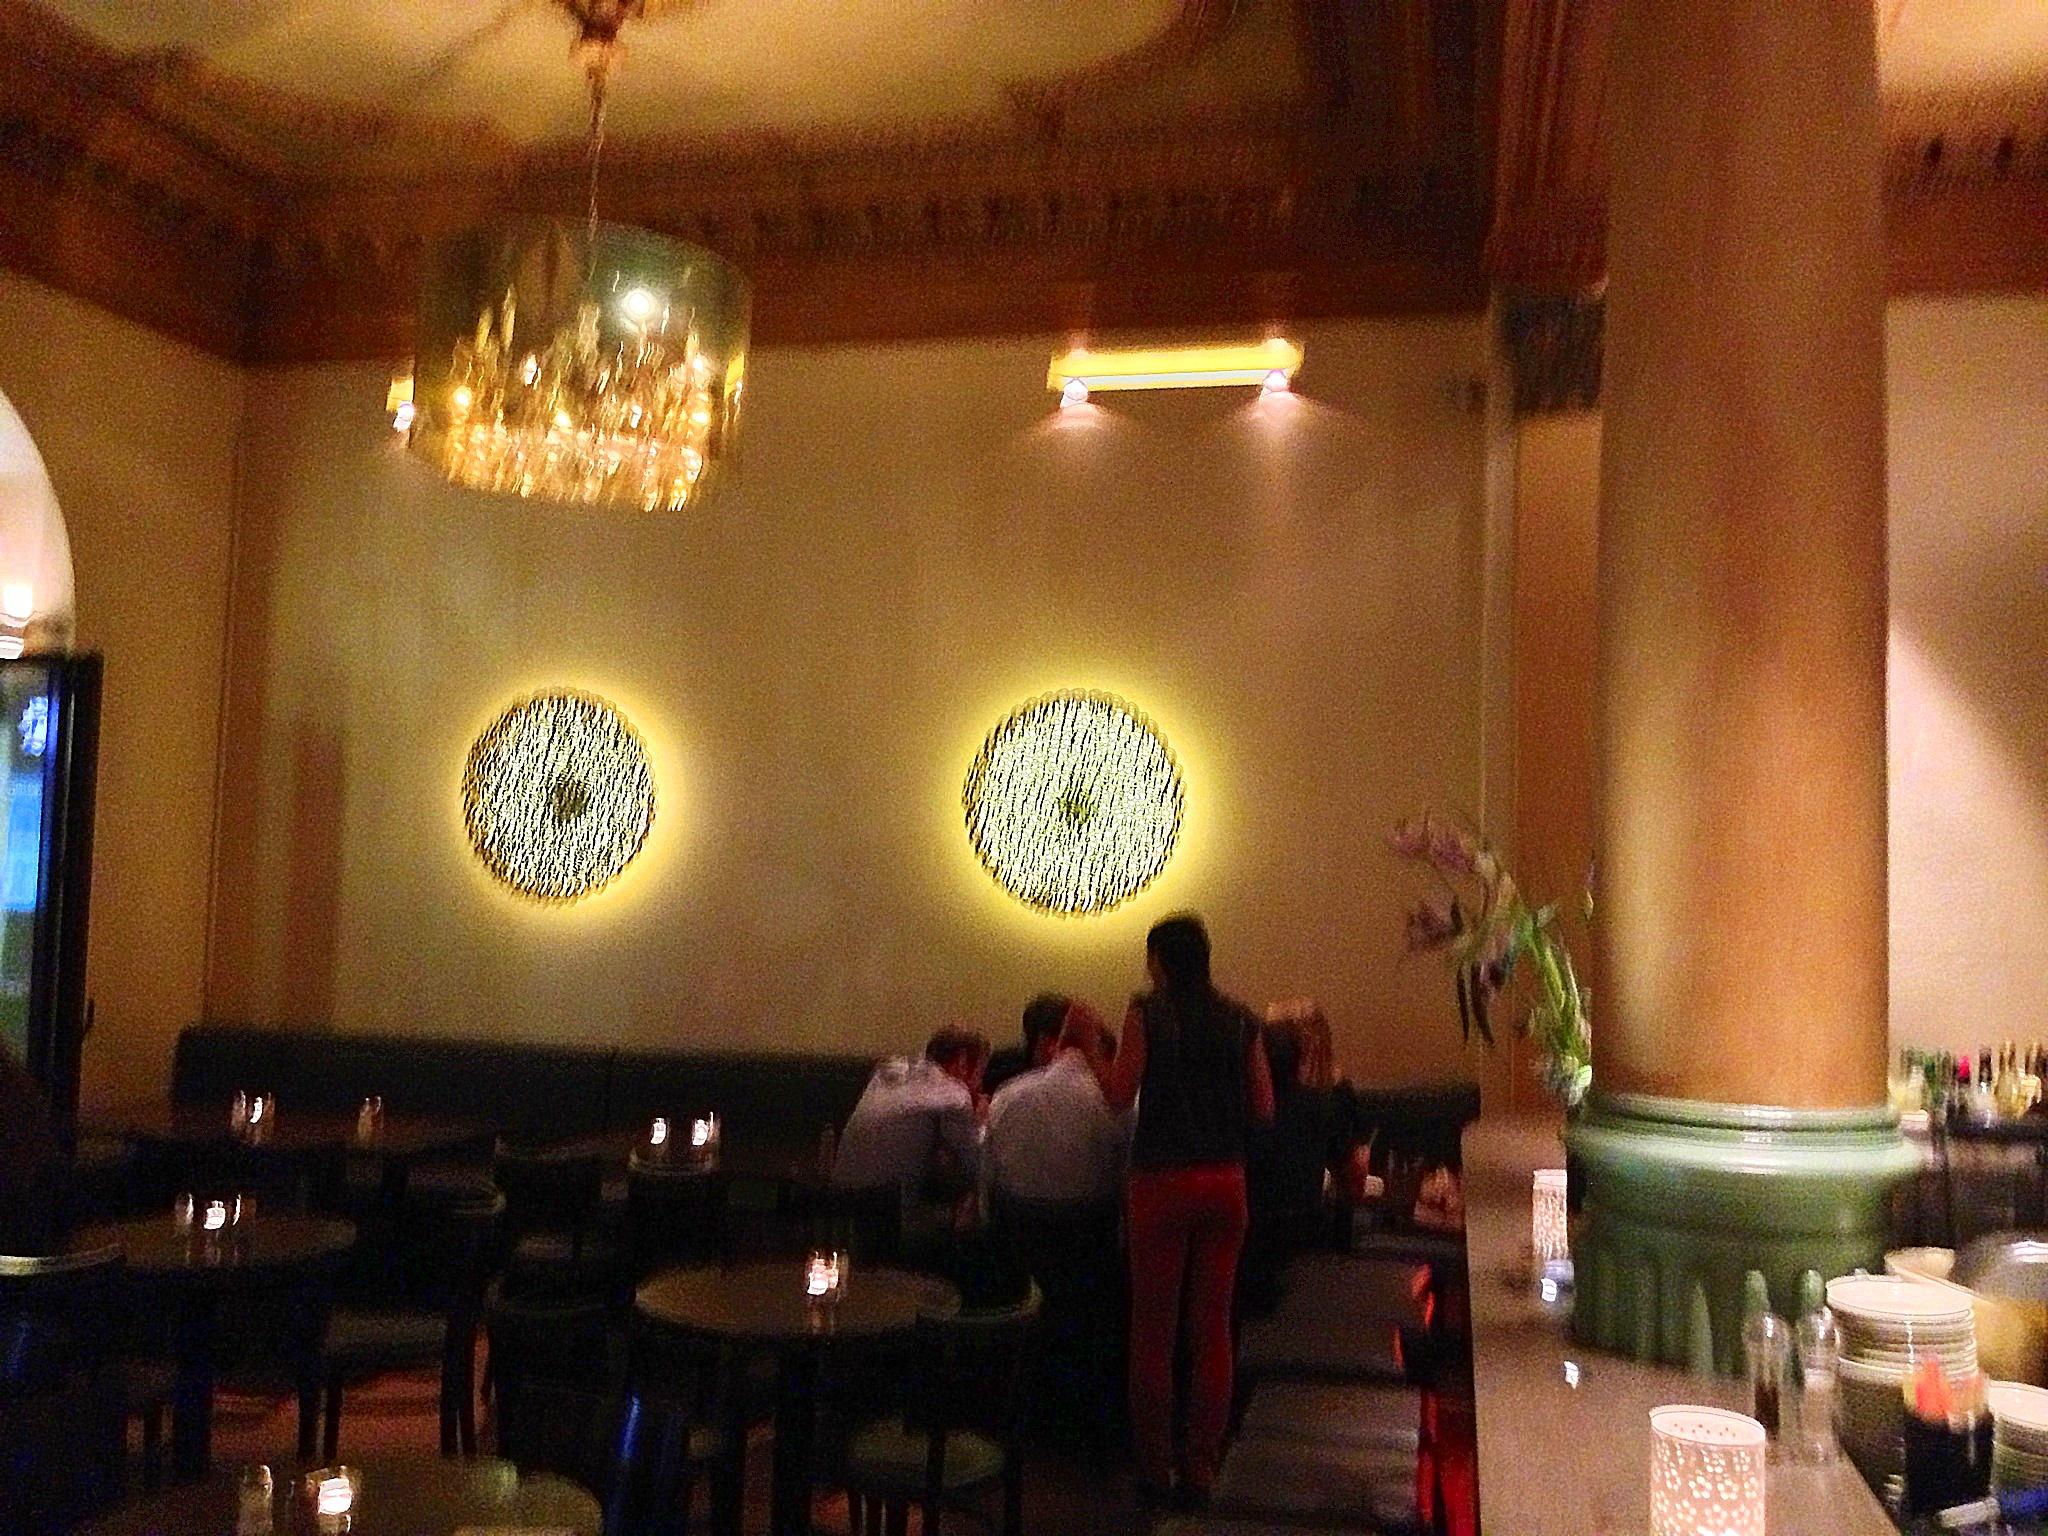 Cover image of this place Café Altschwabing